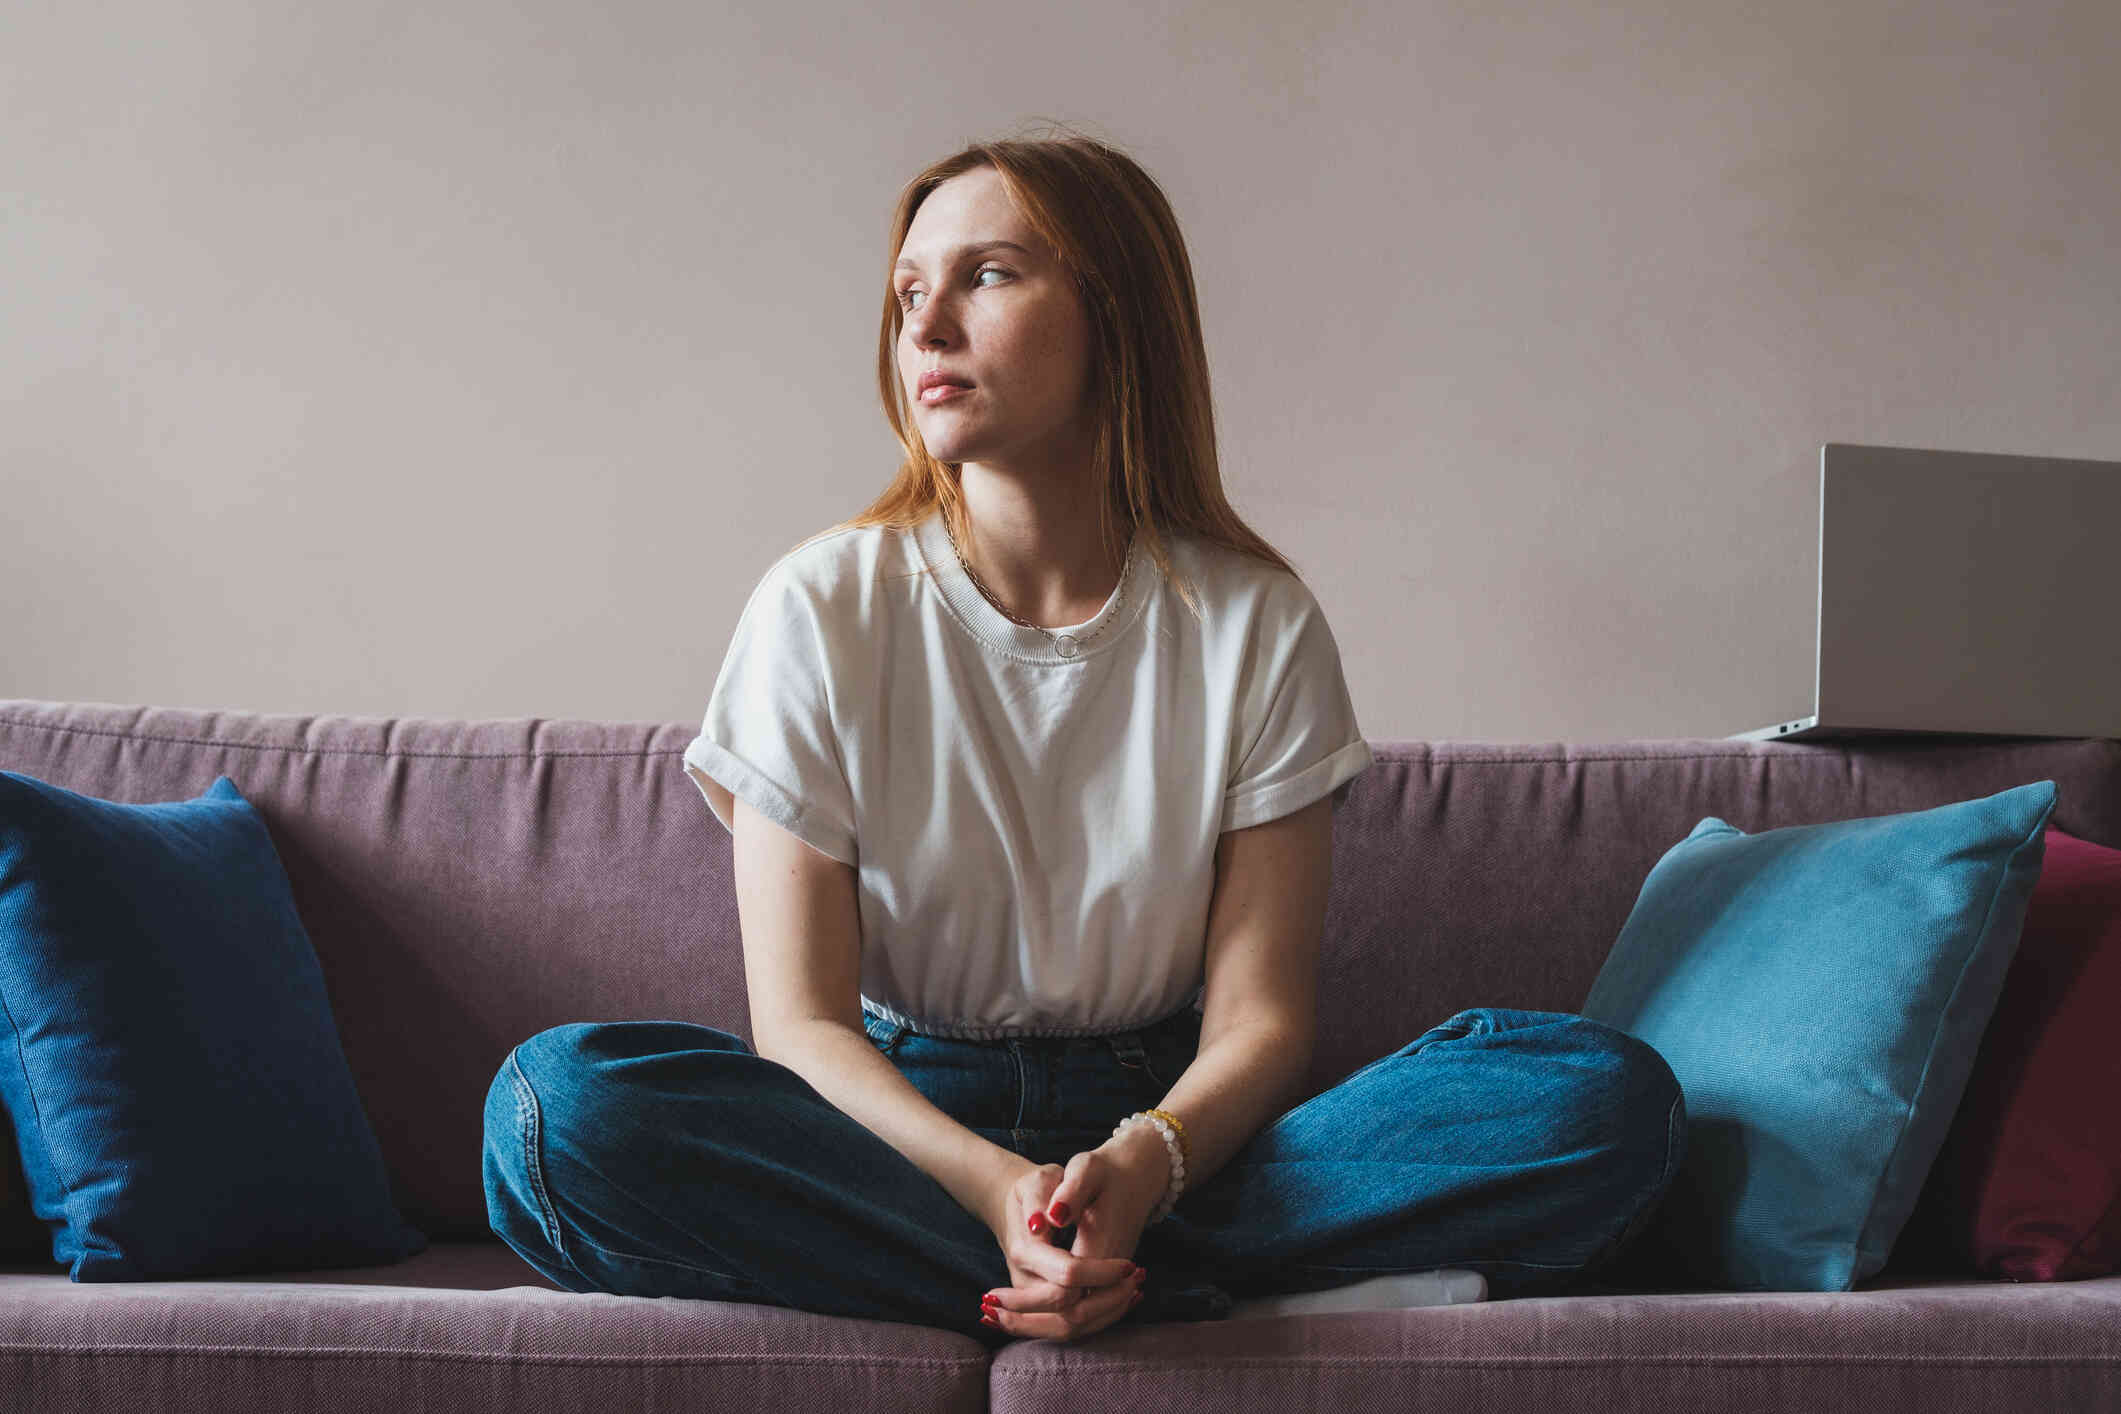 A woman in a white shirt sits cross-legged on the couch and gazes off with a sad expression.